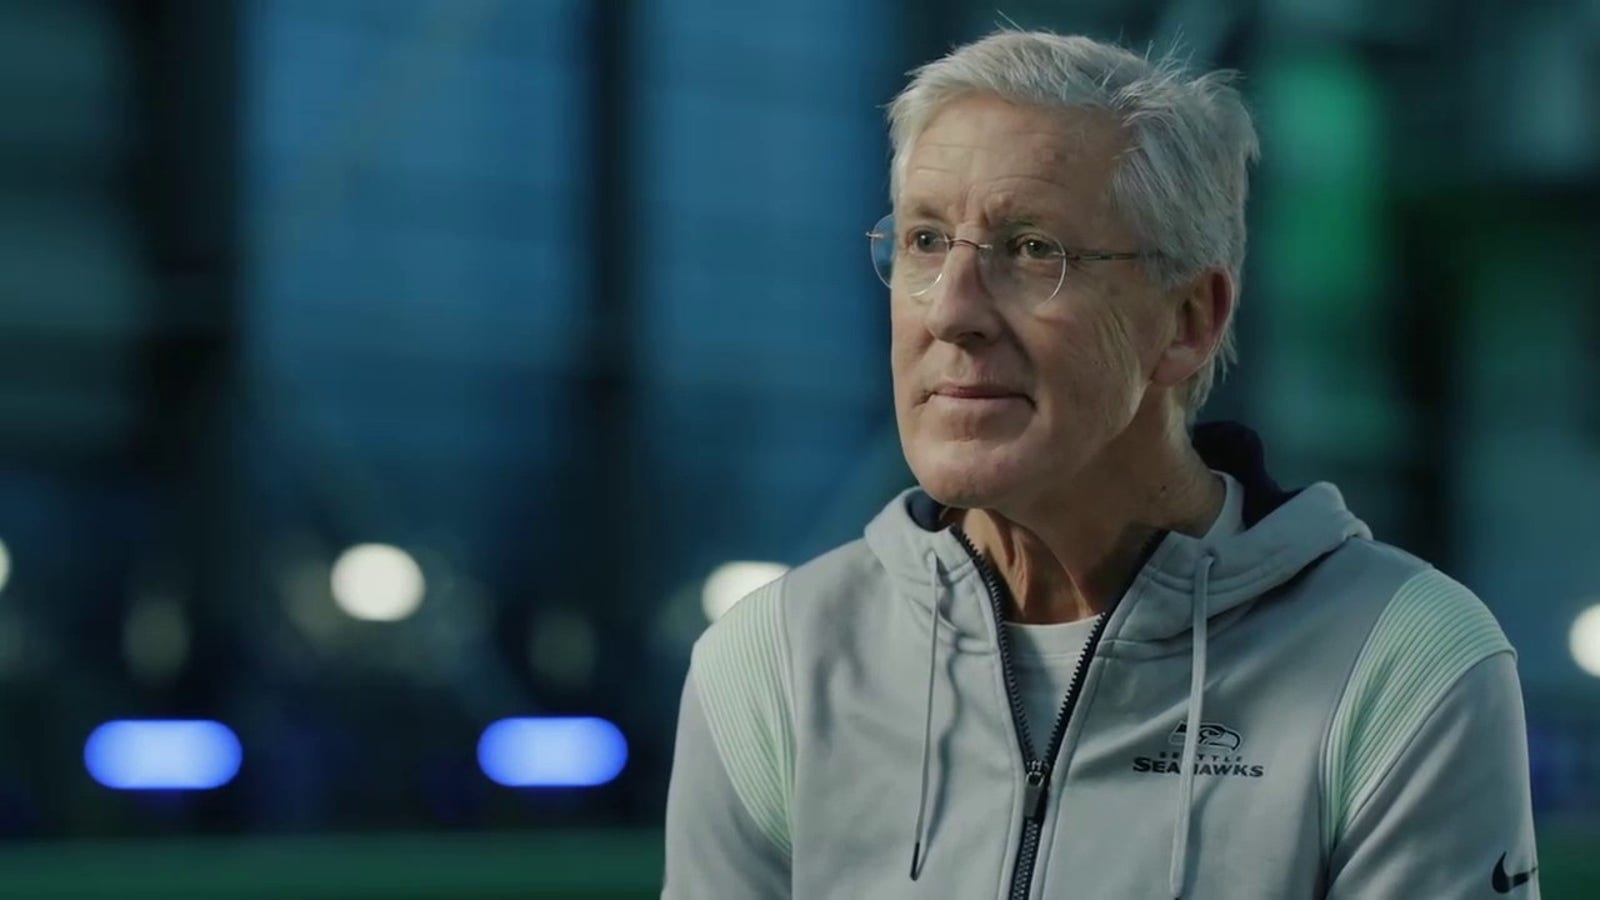 Pete Carroll discusses Seahawks' surprise season, Geno Smith and more